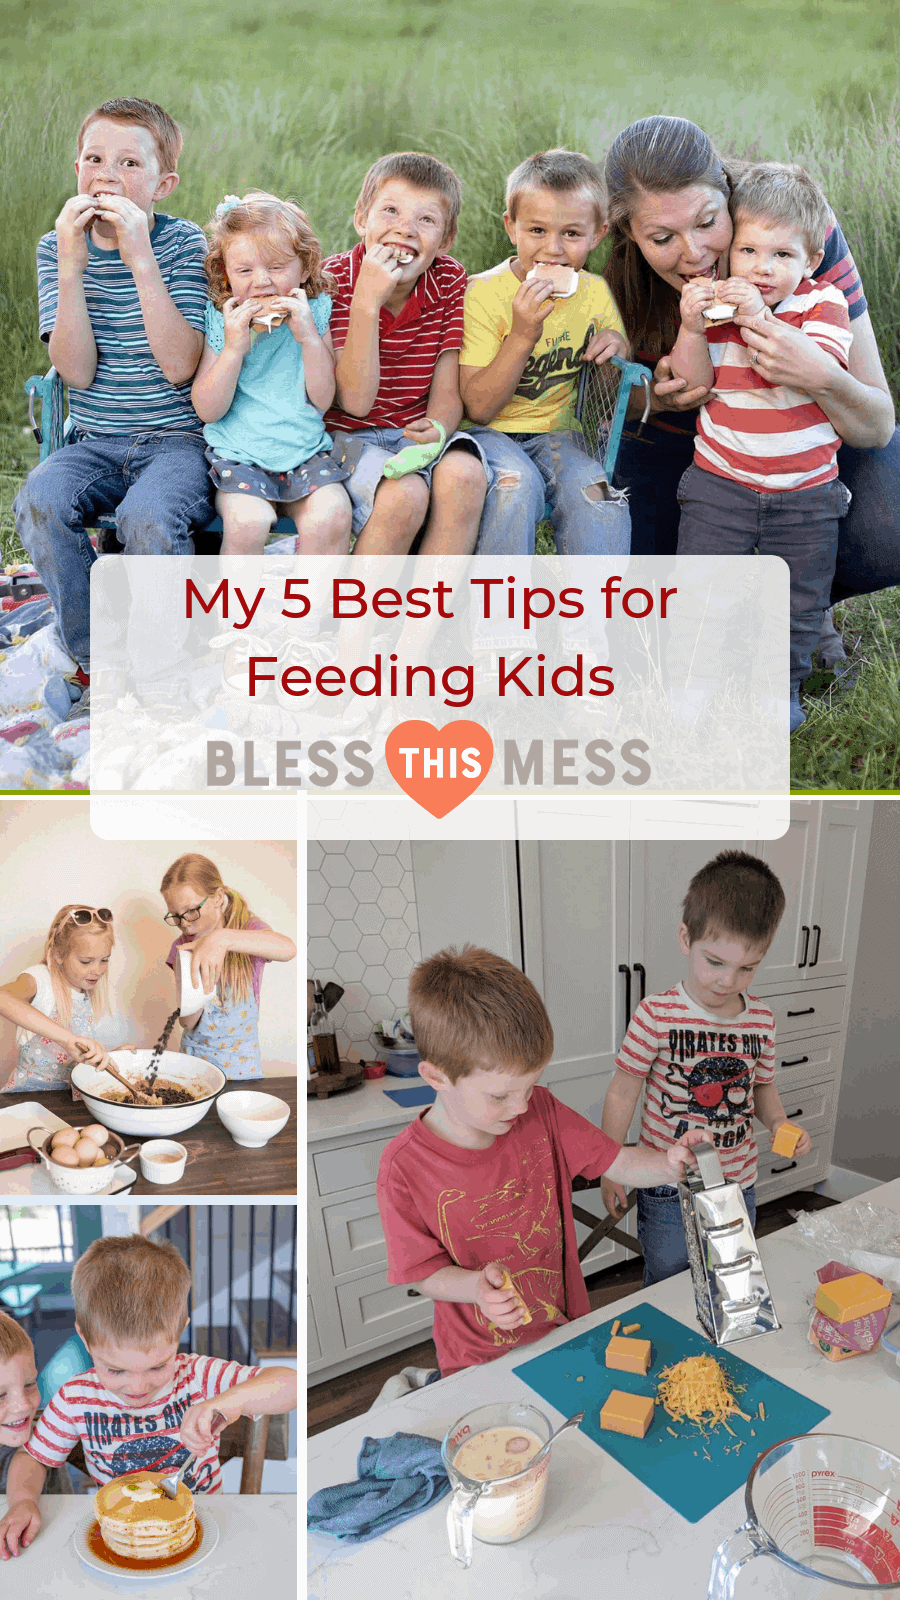 Feeding kids isn't always a walk in the park, but with my 5 best tips for feeding kids, I hope you come away with some tangible advice and practical ideas for making mealtimes a little less stressful and a whole lot more enjoyable for the entire family.